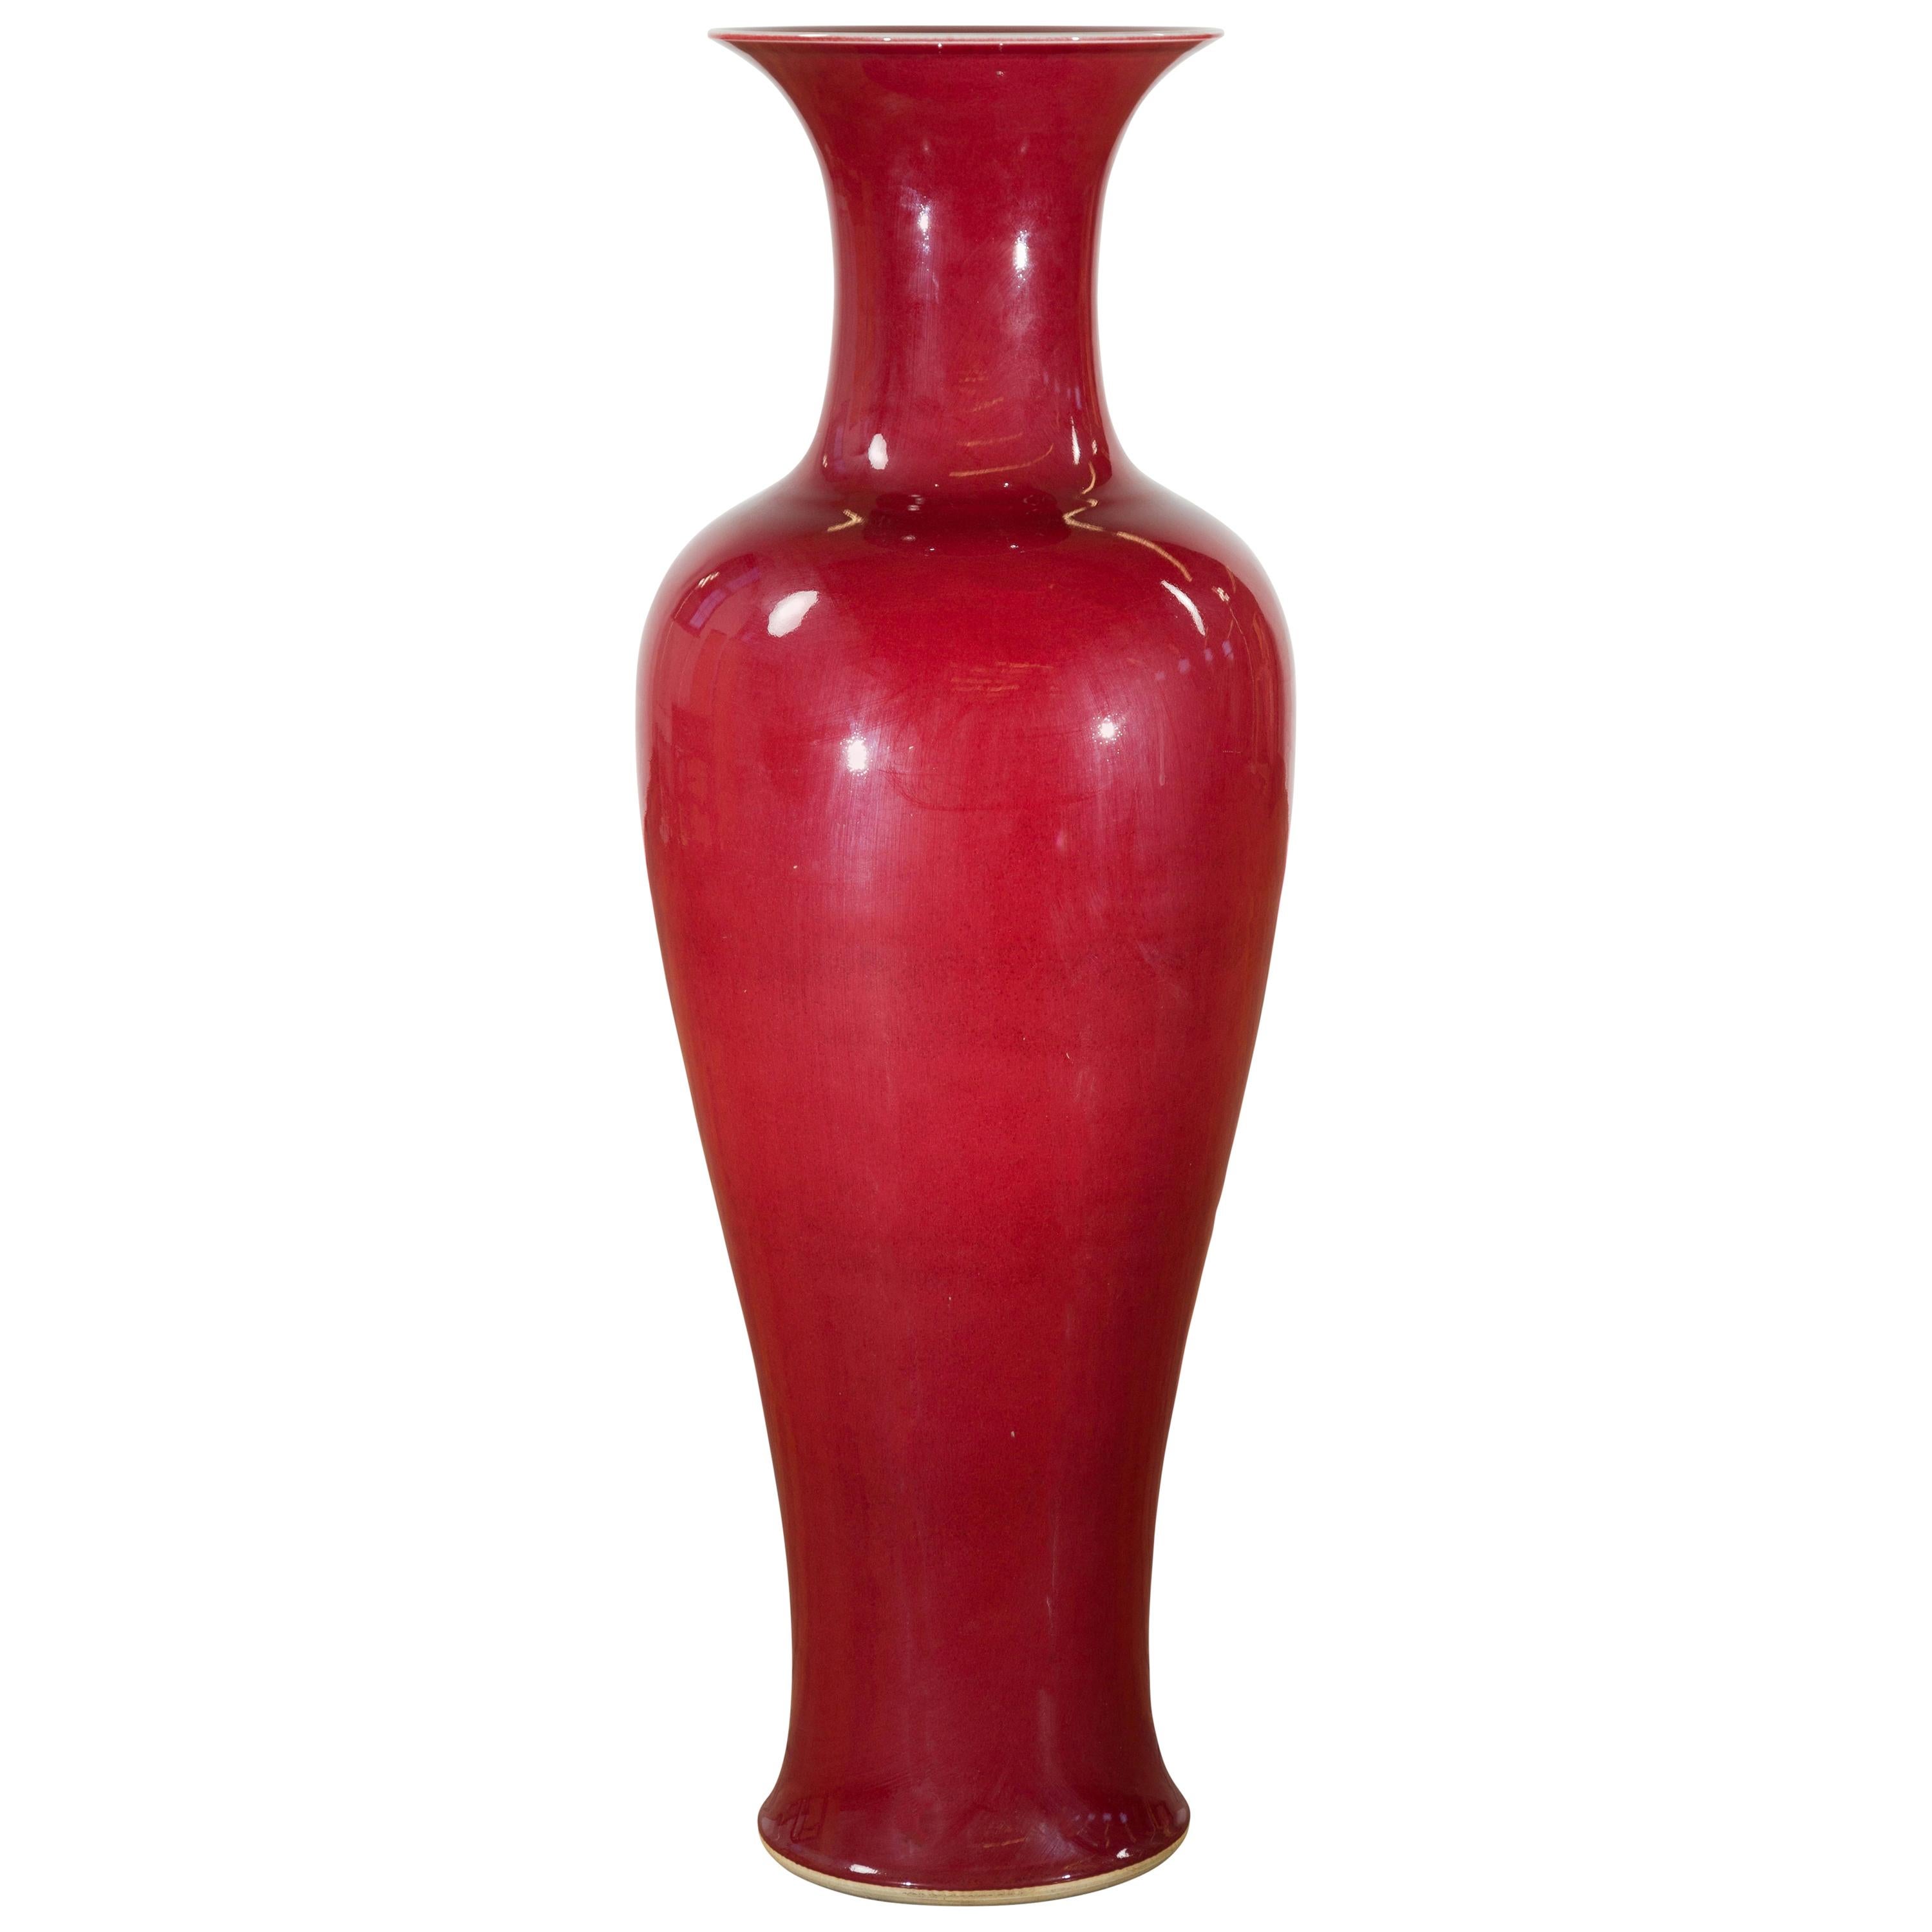 Chinese Vintage Oxblood Altar Vase with Flaring Neck, Several Available